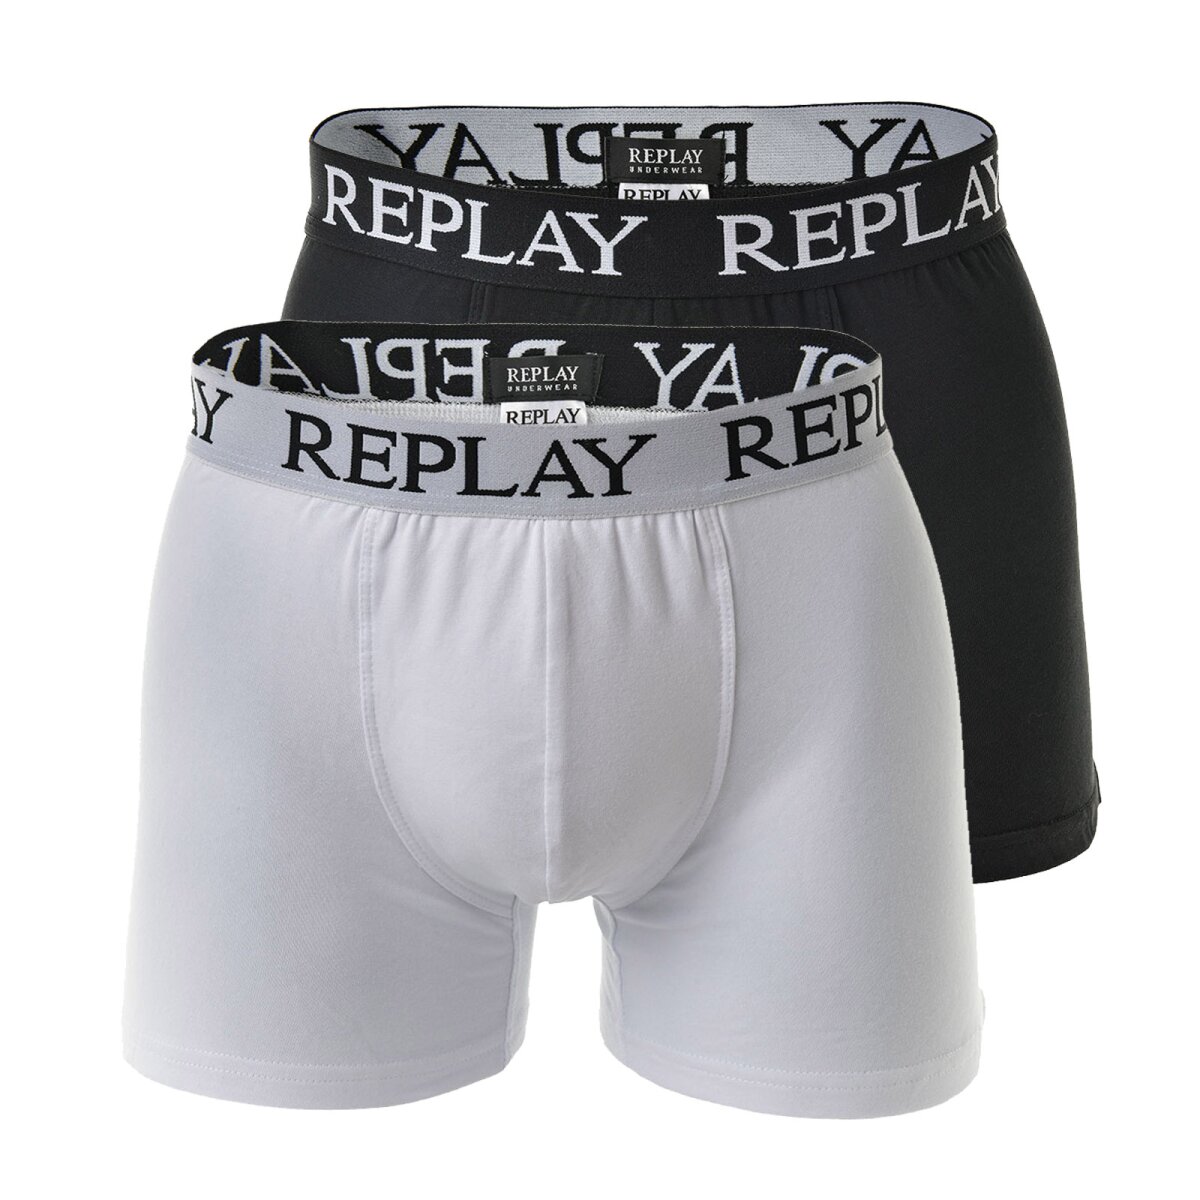 heks Vacature ontploffen REPLAY Men's Boxer Shorts, Pack of 2 - Trunks, Cotton Stretch, 24,95